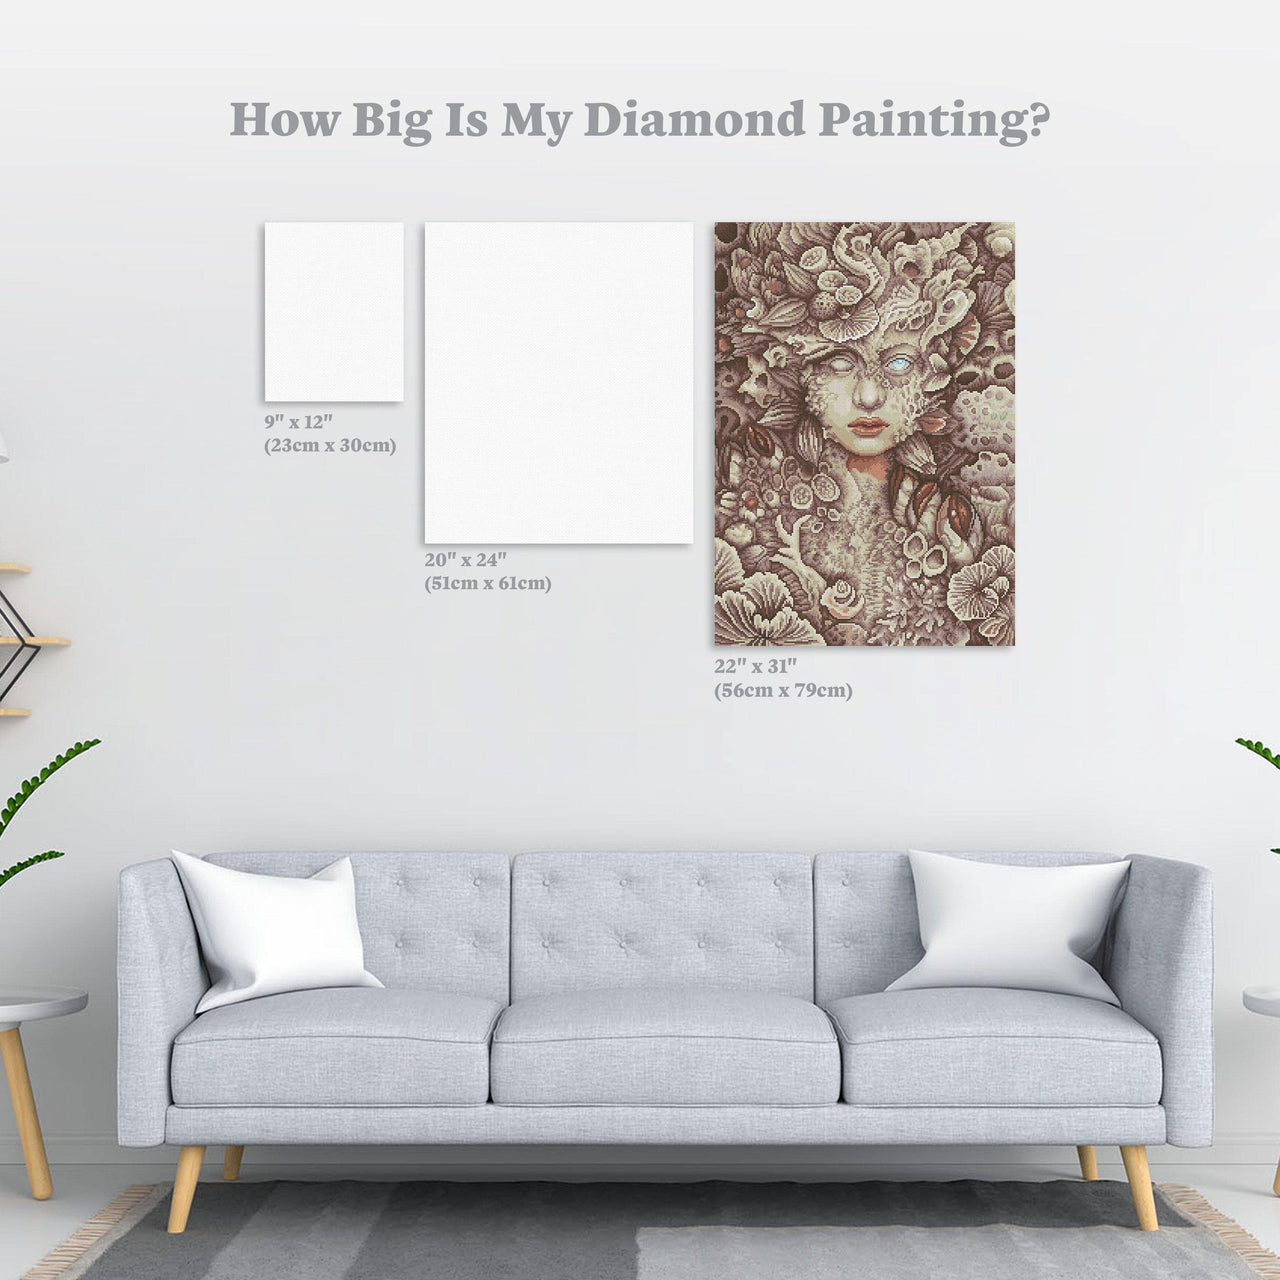 Diamond Painting Echoes From The Past 22" x 31″ (56cm x 79cm) / Round With 27 Colors Including 3 ABs / 55,919